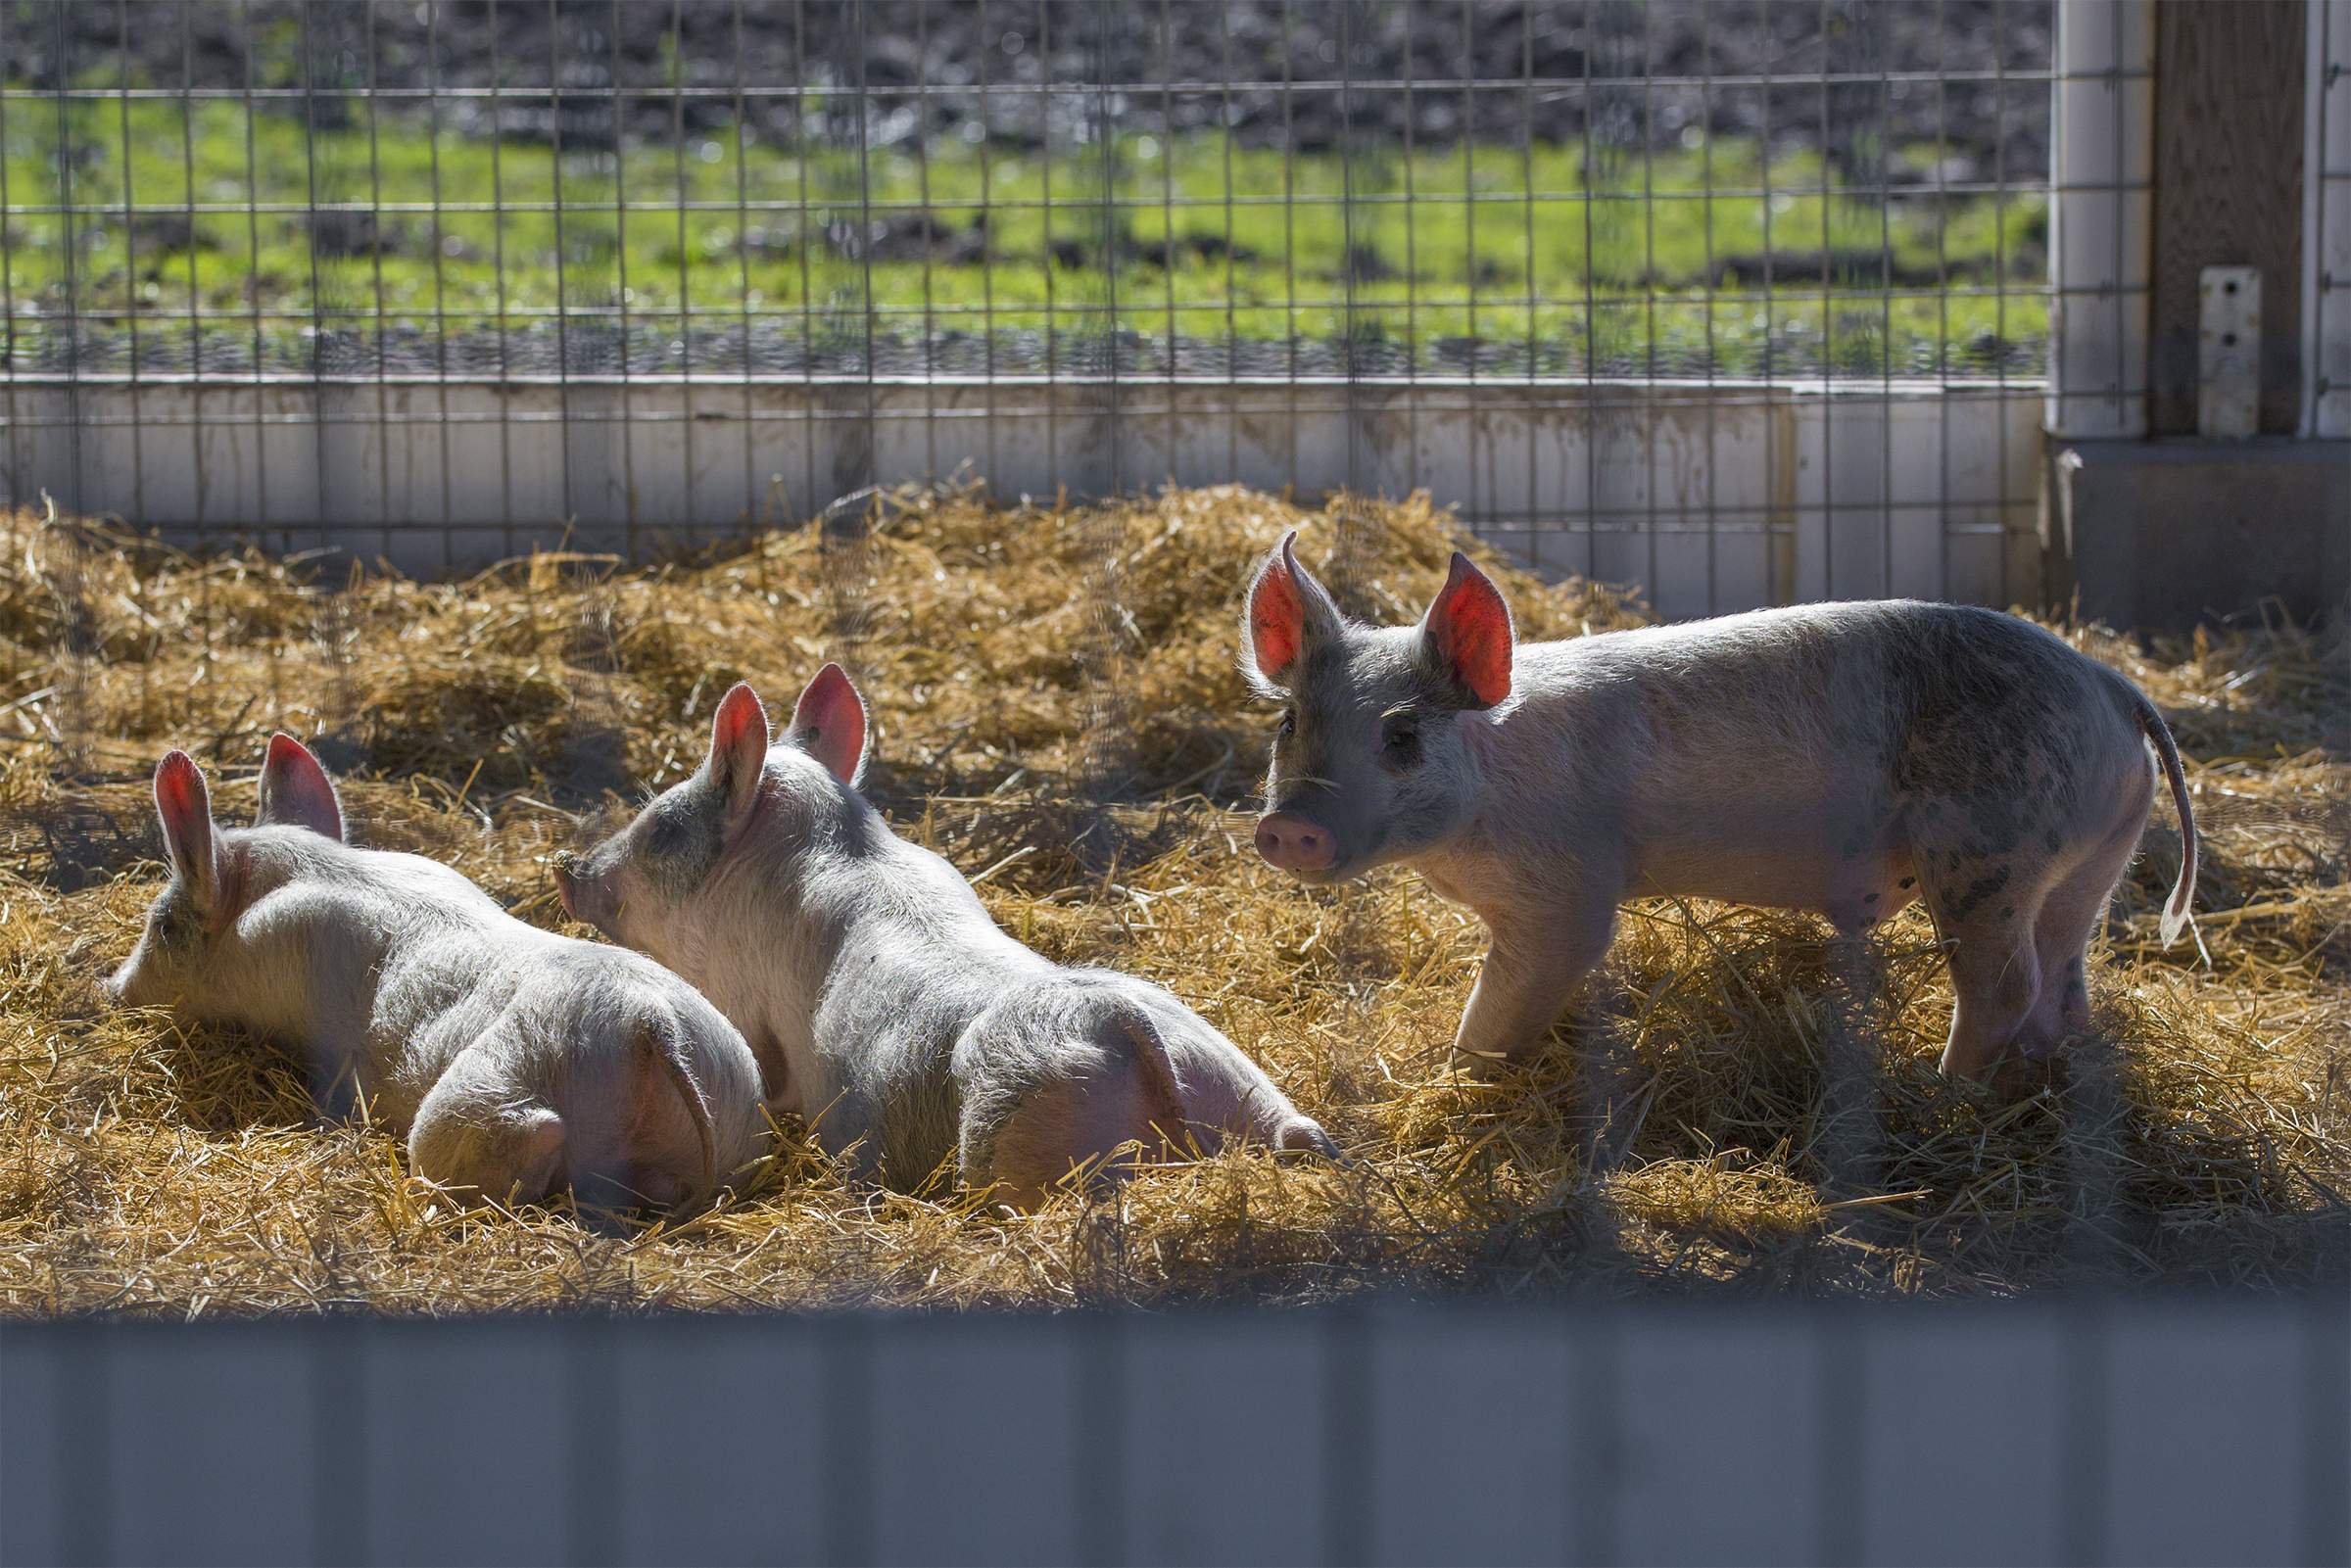 Piglets relaxing in the evening sun in their enclosure at Charlie's Acres. (Photo by Robbi Pengelly/Index-Tribune)